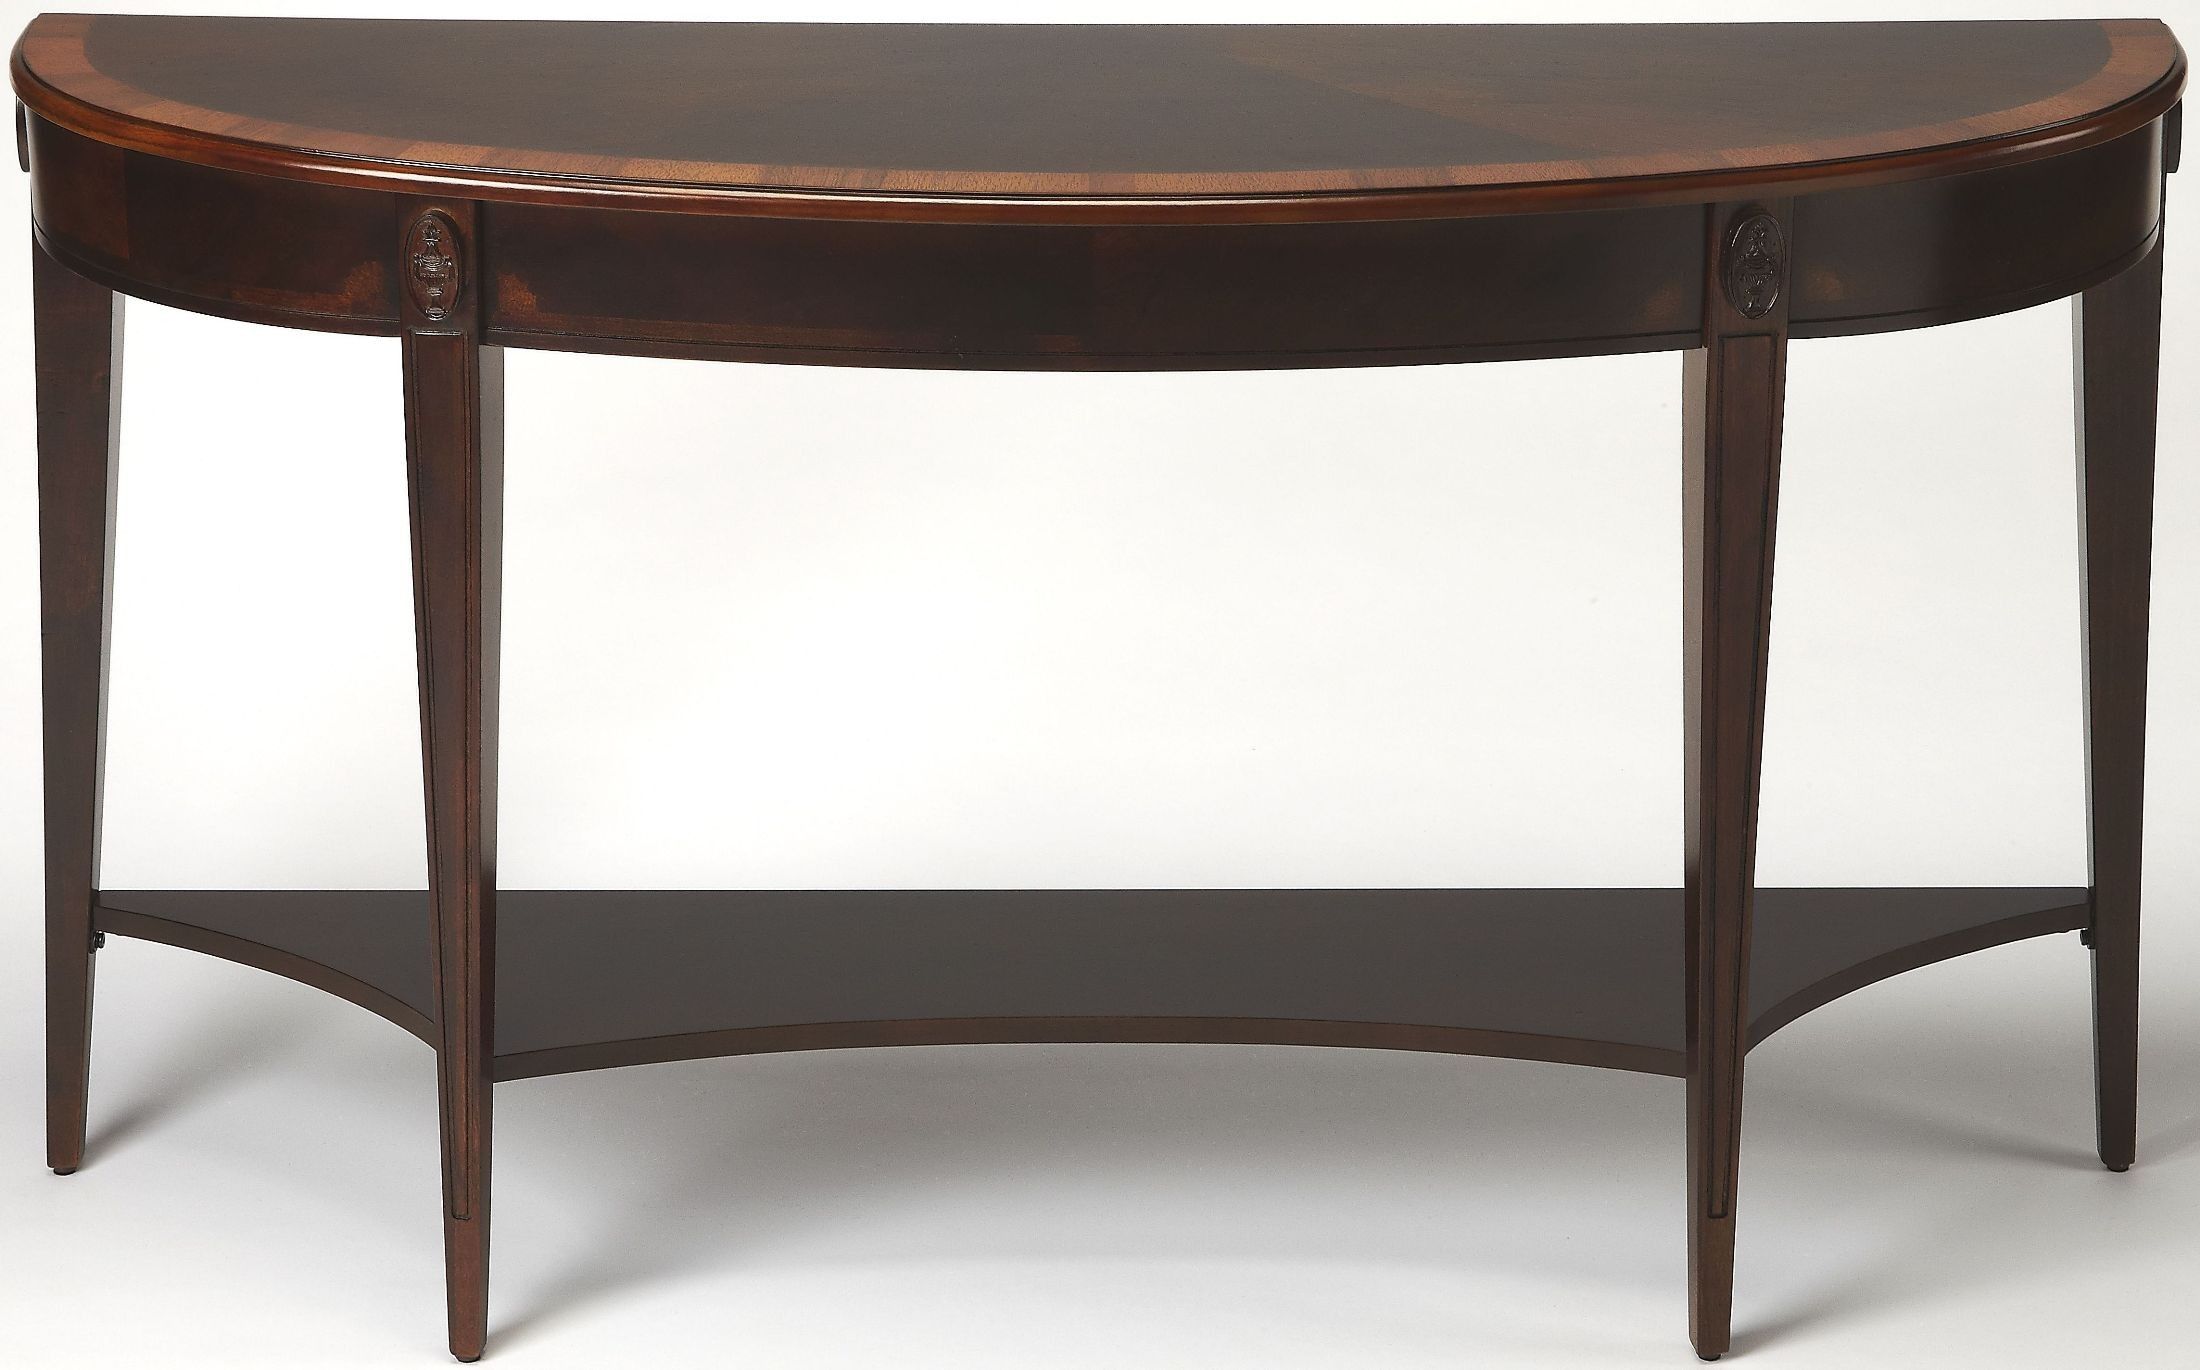 Astor Dark Brown Demilune Console Table From Butler Throughout Brown Wood Console Tables (View 20 of 20)